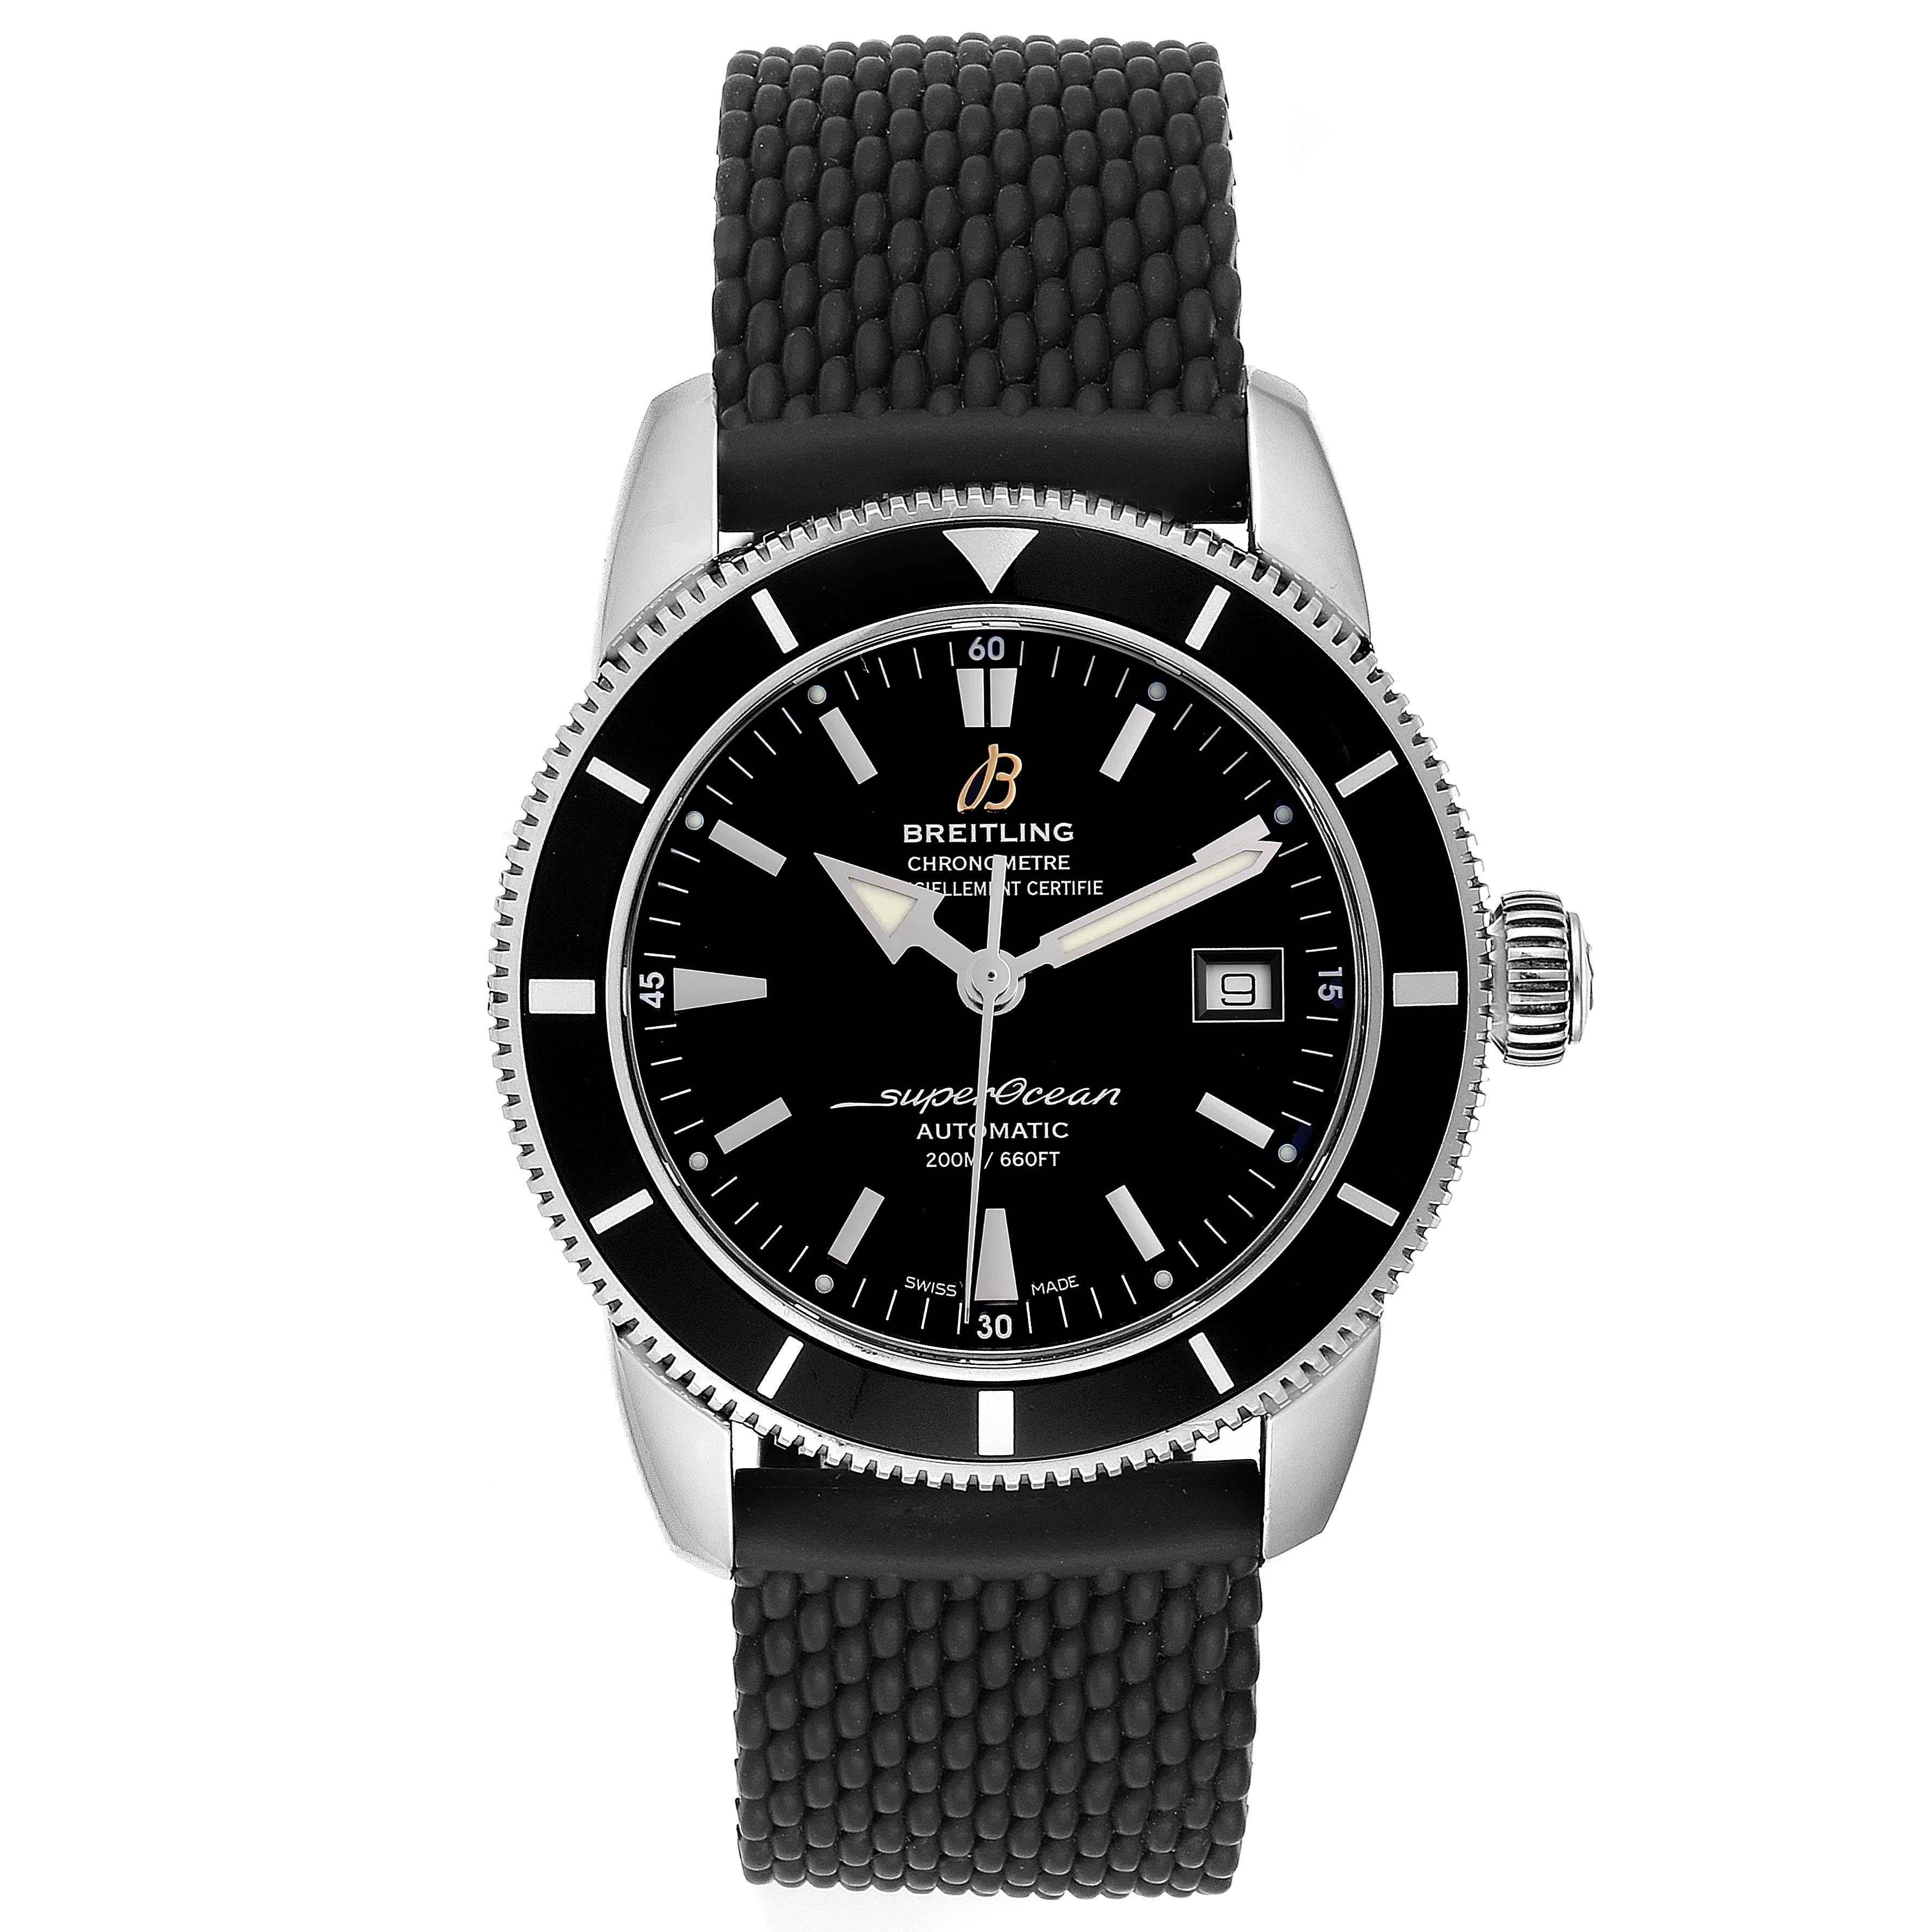 Breitling Superocean Heritage 42 Black Dial Steel Mens Watch A17321. Automatic self-winding movement. Stainless steel case 42.0 mm in diameter. Stainless steel screwed-down crown. Black unidirectional revolving bezel. Scratch resistant sapphire